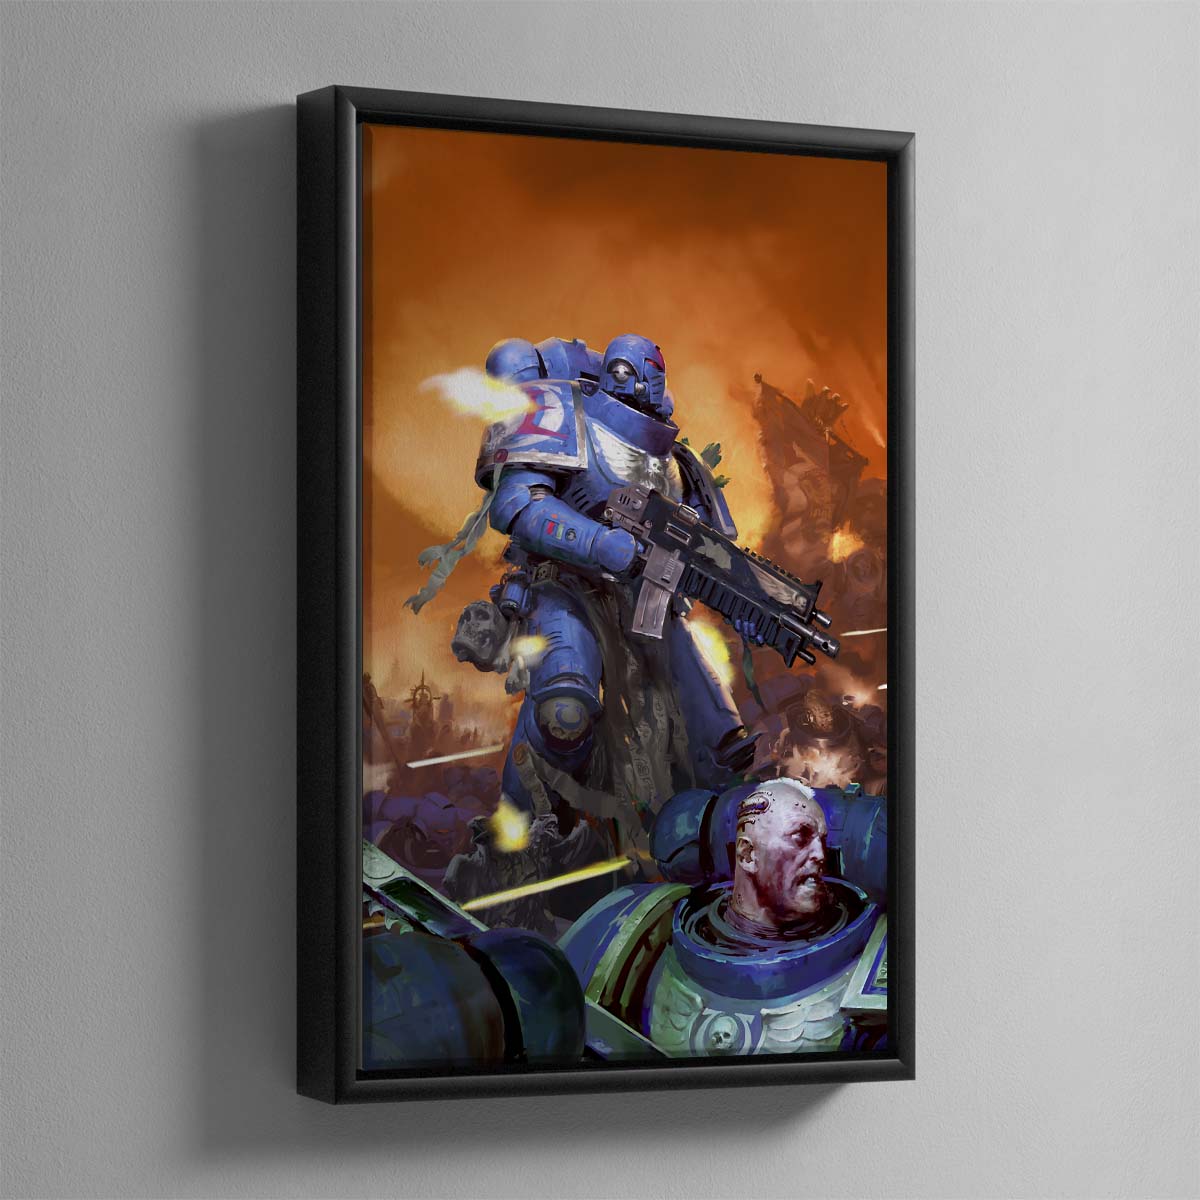 Space Marines Codex Cover Art – Framed Canvas